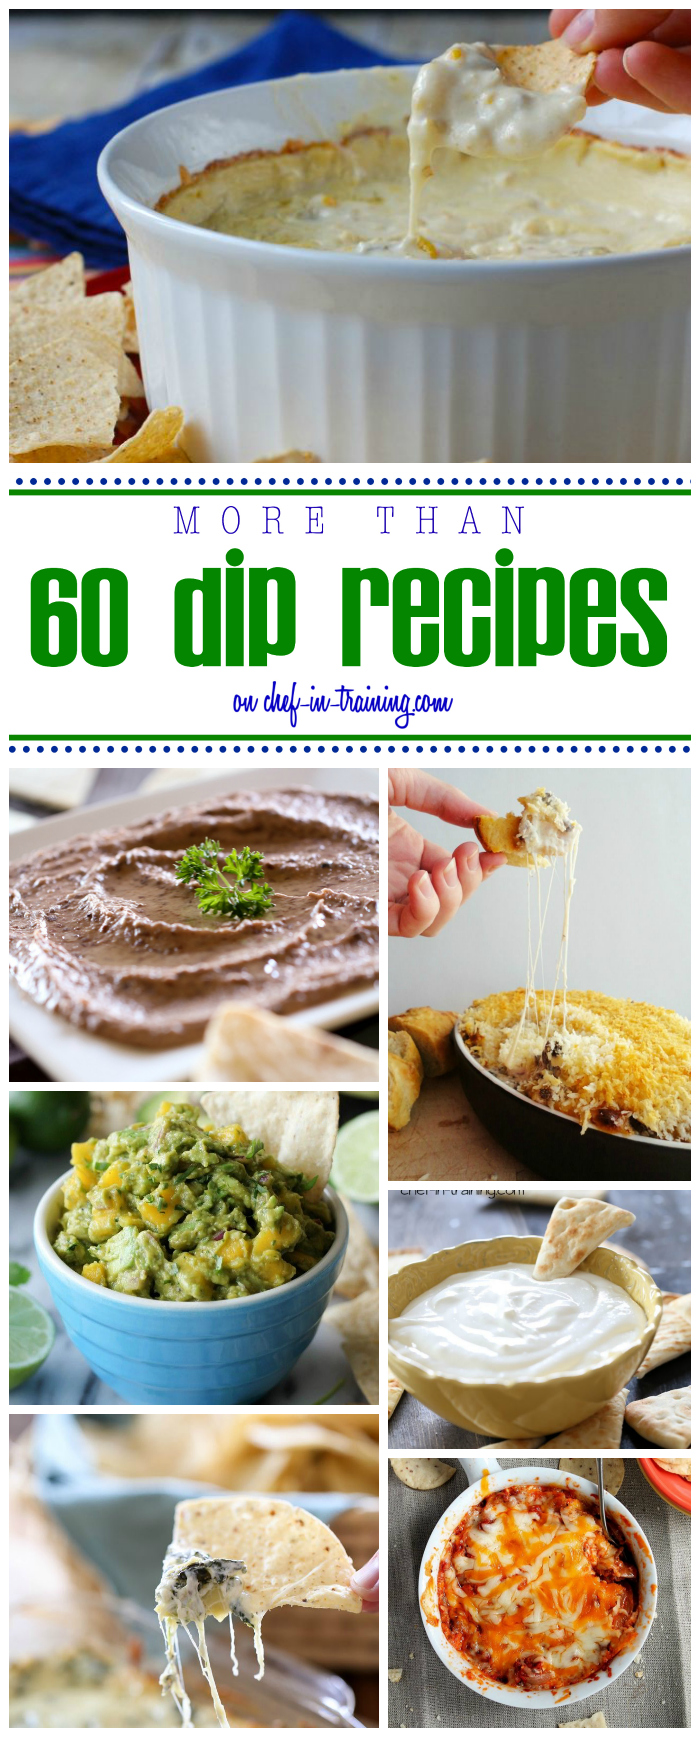 60 Dip Recipes at chef-in-training.com …This round up  is perfect for your next party or get together!